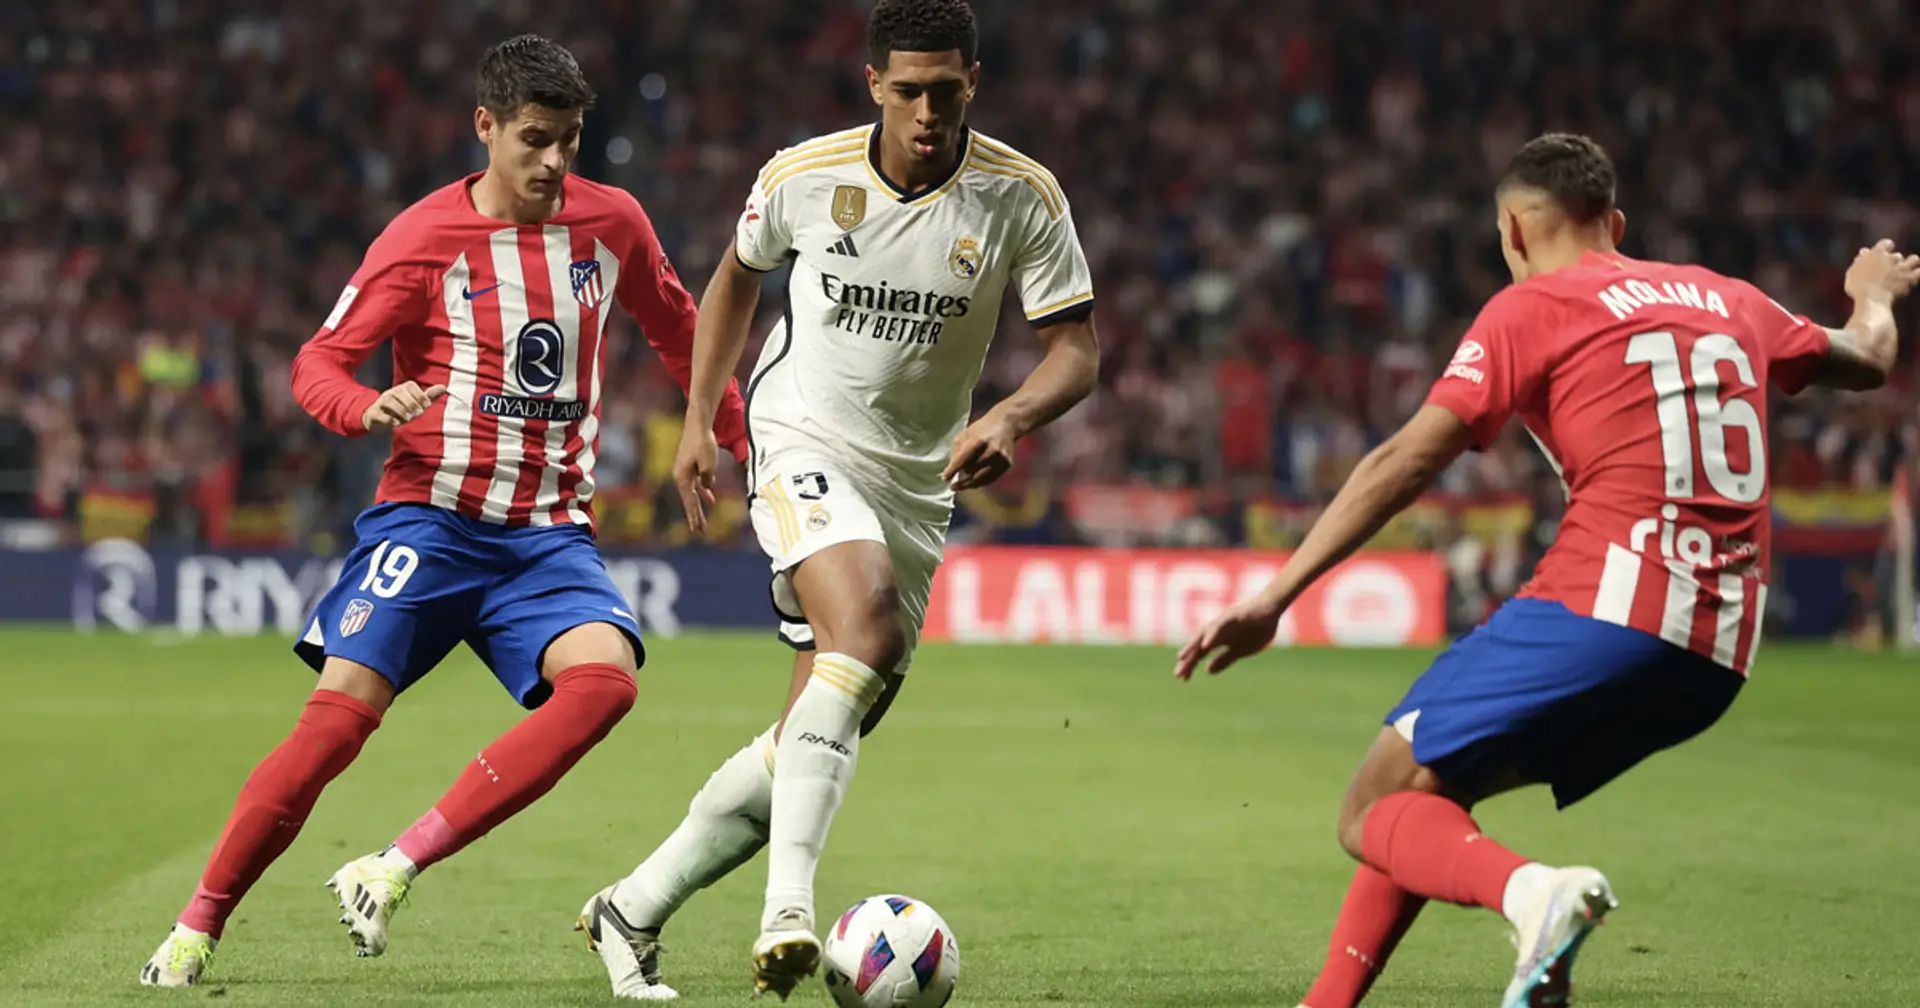 Real Madrid vs Atletico Madrid: Predictions and betting odds